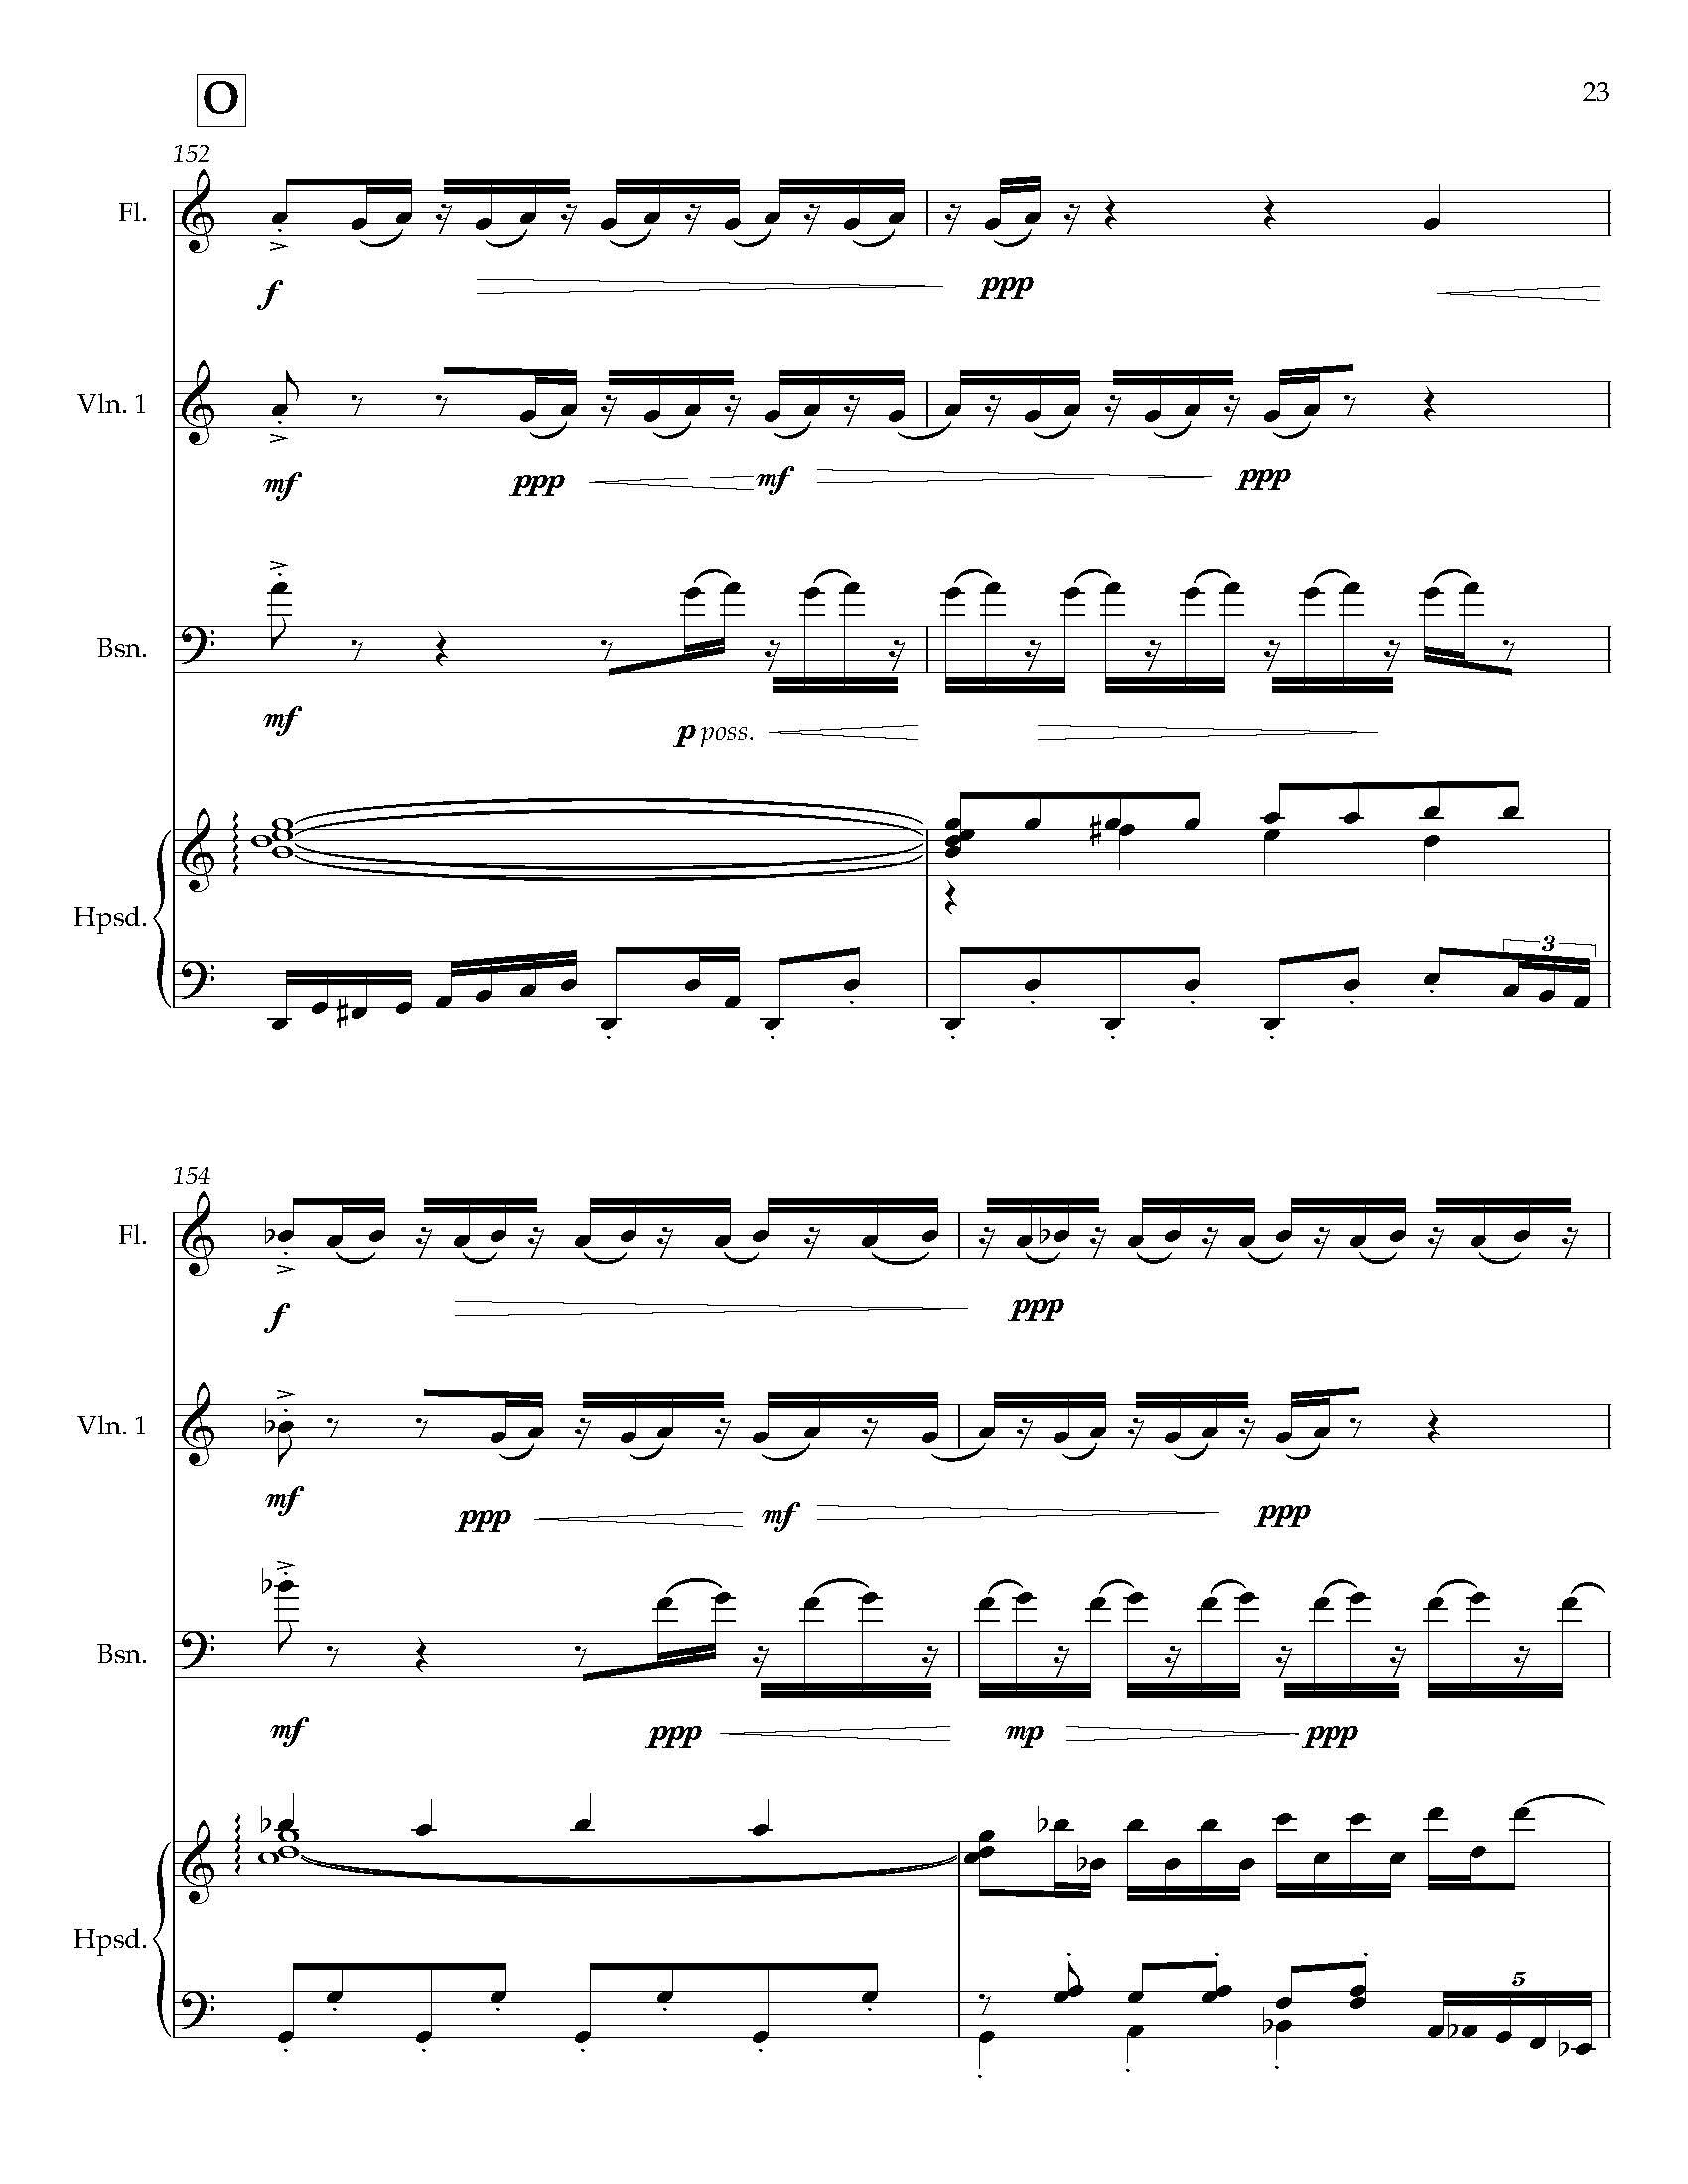 The Hourglass Equation - Complete Score_Page_29.jpg